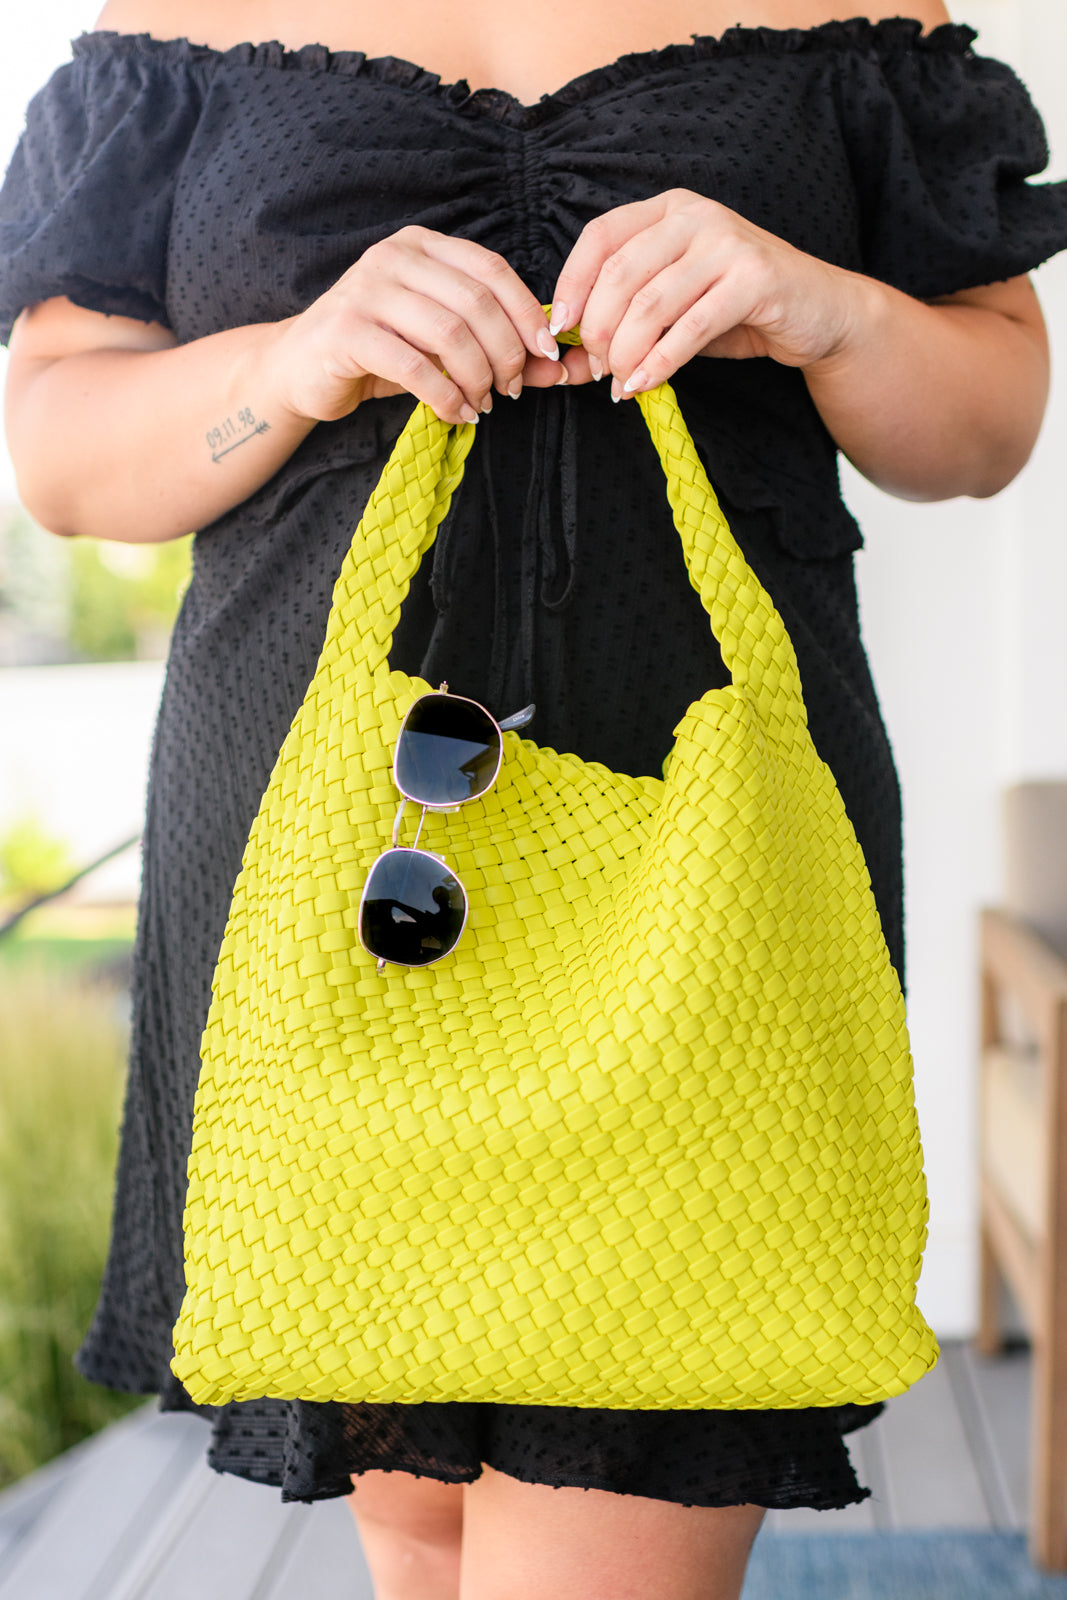 Woven and Worn Tote in Citron- WEBSITE EXCLUSIVE